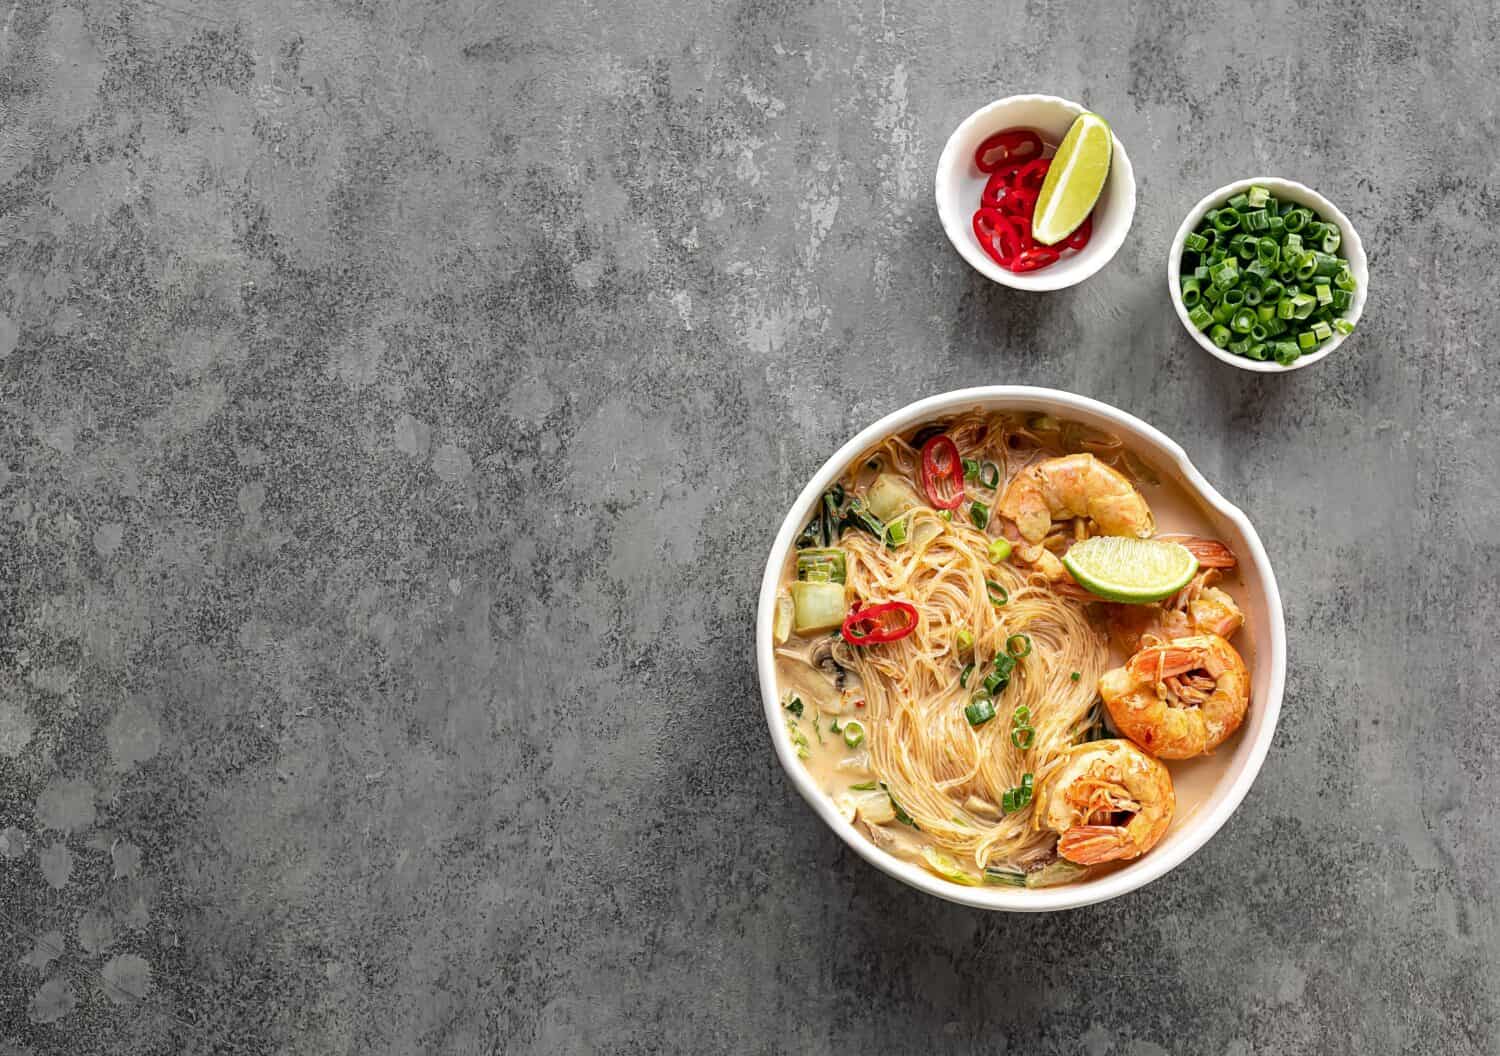 Bowl of curry laksa, a spicy glass noodle dish popular in Southeast Asia with prawns, bok choy, lime, ginger, and chili. Most variations of laksa are prepared with a rich and spicy coconut soup.